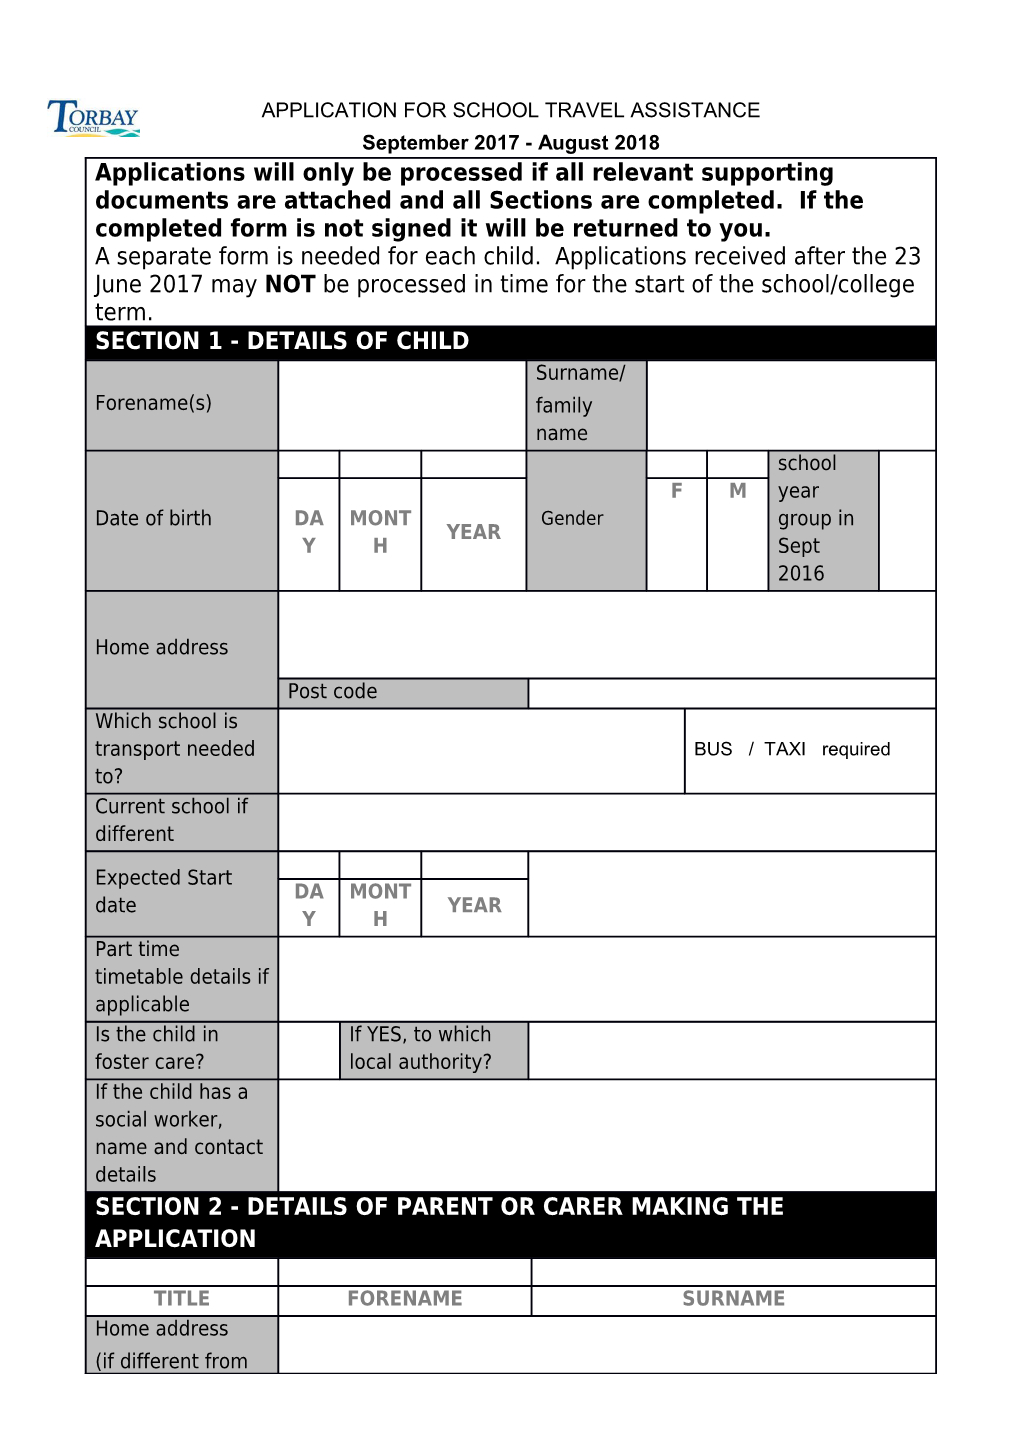 Please Return This Form and All Supporting Documents